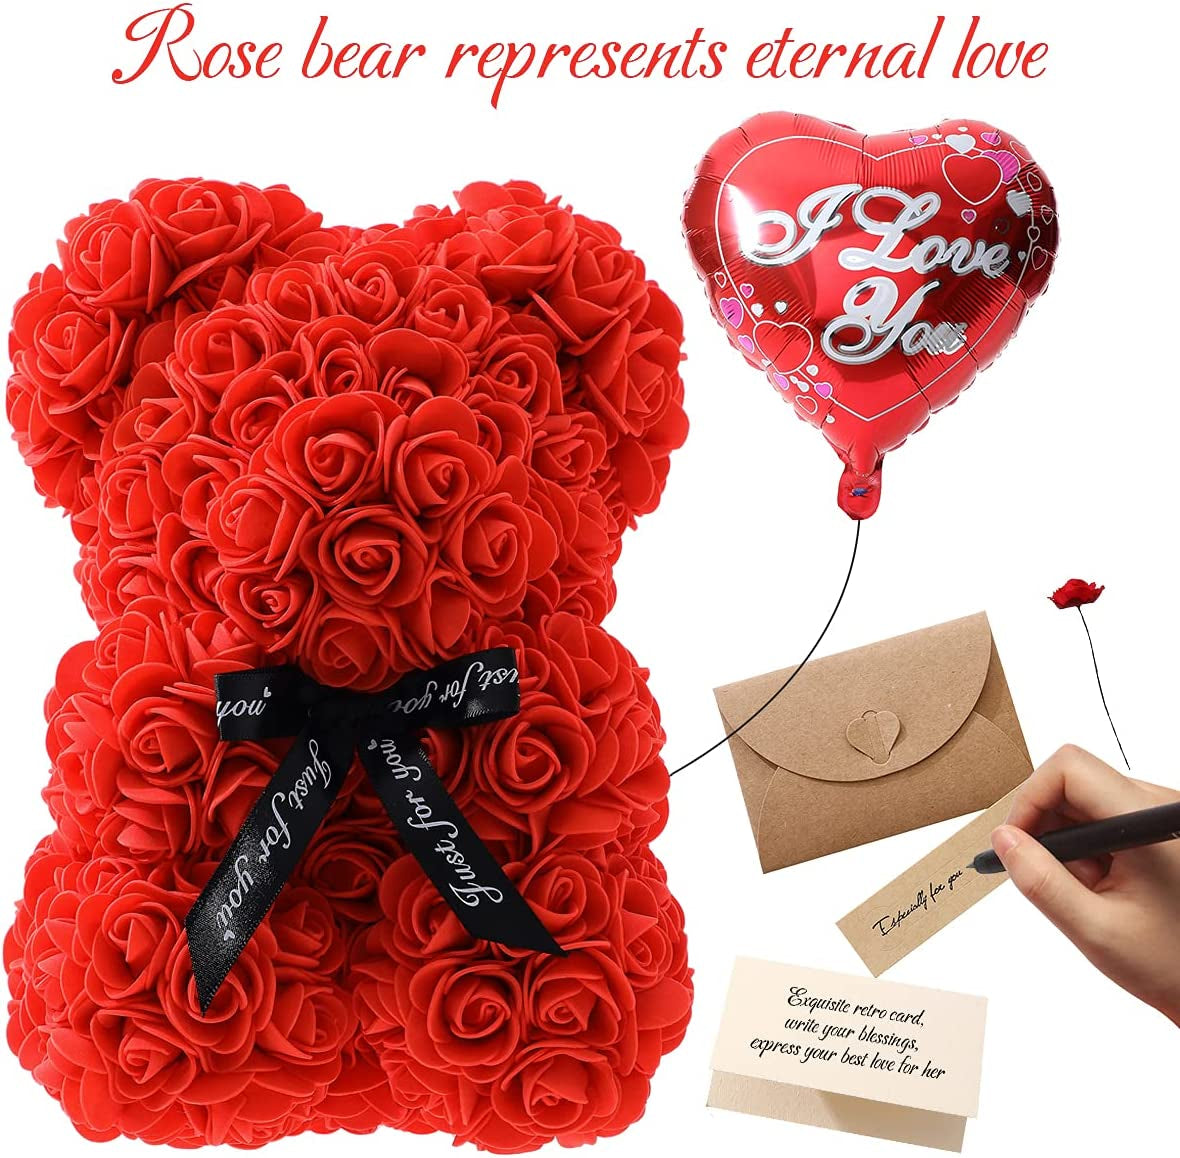 Gifts for Women - Rose Flower Bear - Rose Bear ,Pure Handmade Rose Teddy Bear ,Gift for Mothers Day,Valentines Day, Anniversary and Bridal Showers,W/Clear Gift Box and Greeting Card (Red)